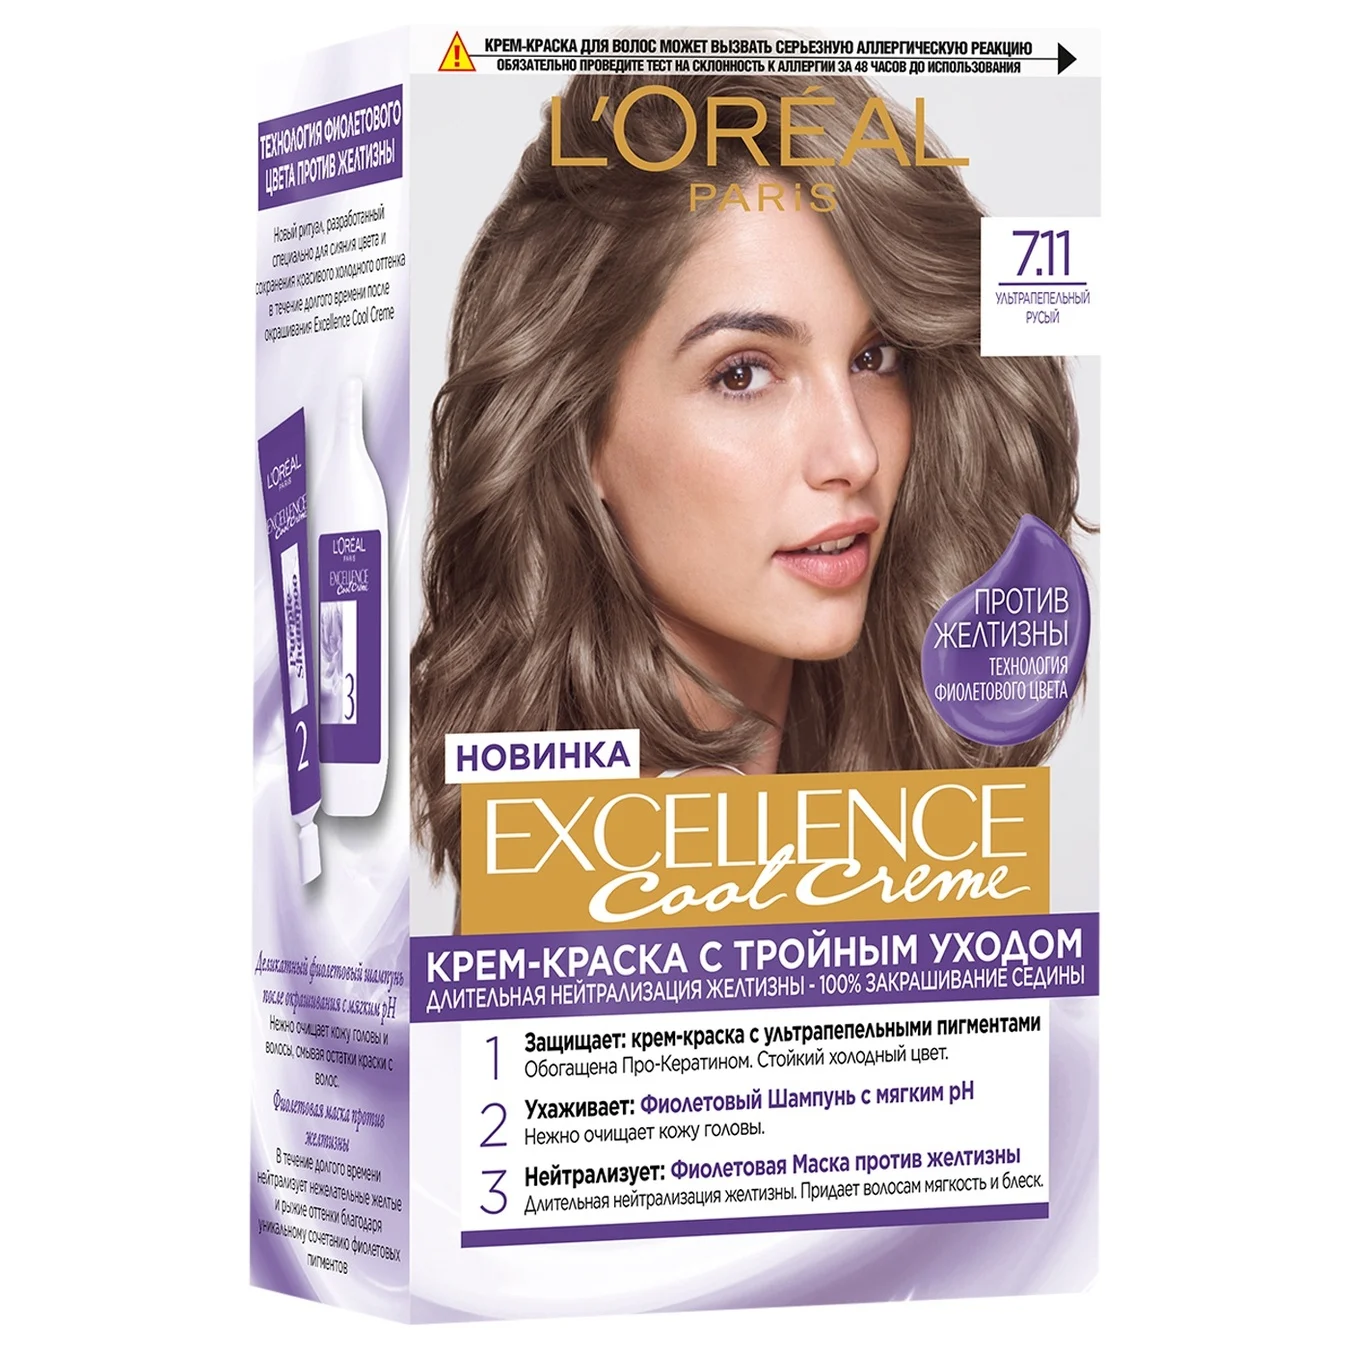 L'Oreal Excellence Cool Creme permanent hair dye cream 7.11